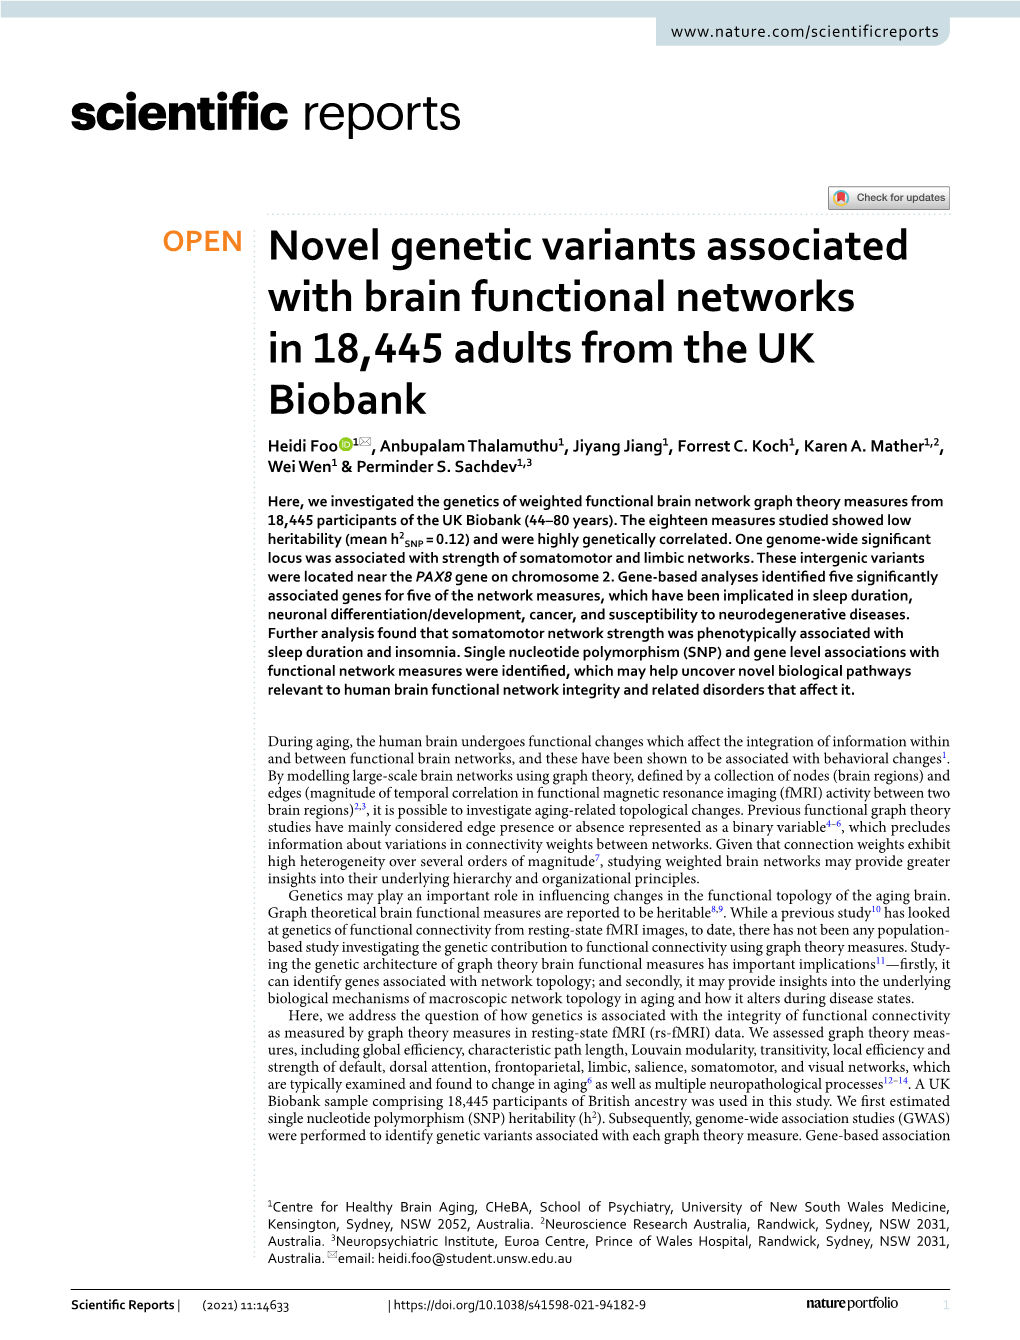 Novel Genetic Variants Associated with Brain Functional Networks in 18,445 Adults from the UK Biobank Heidi Foo 1*, Anbupalam Thalamuthu1, Jiyang Jiang1, Forrest C